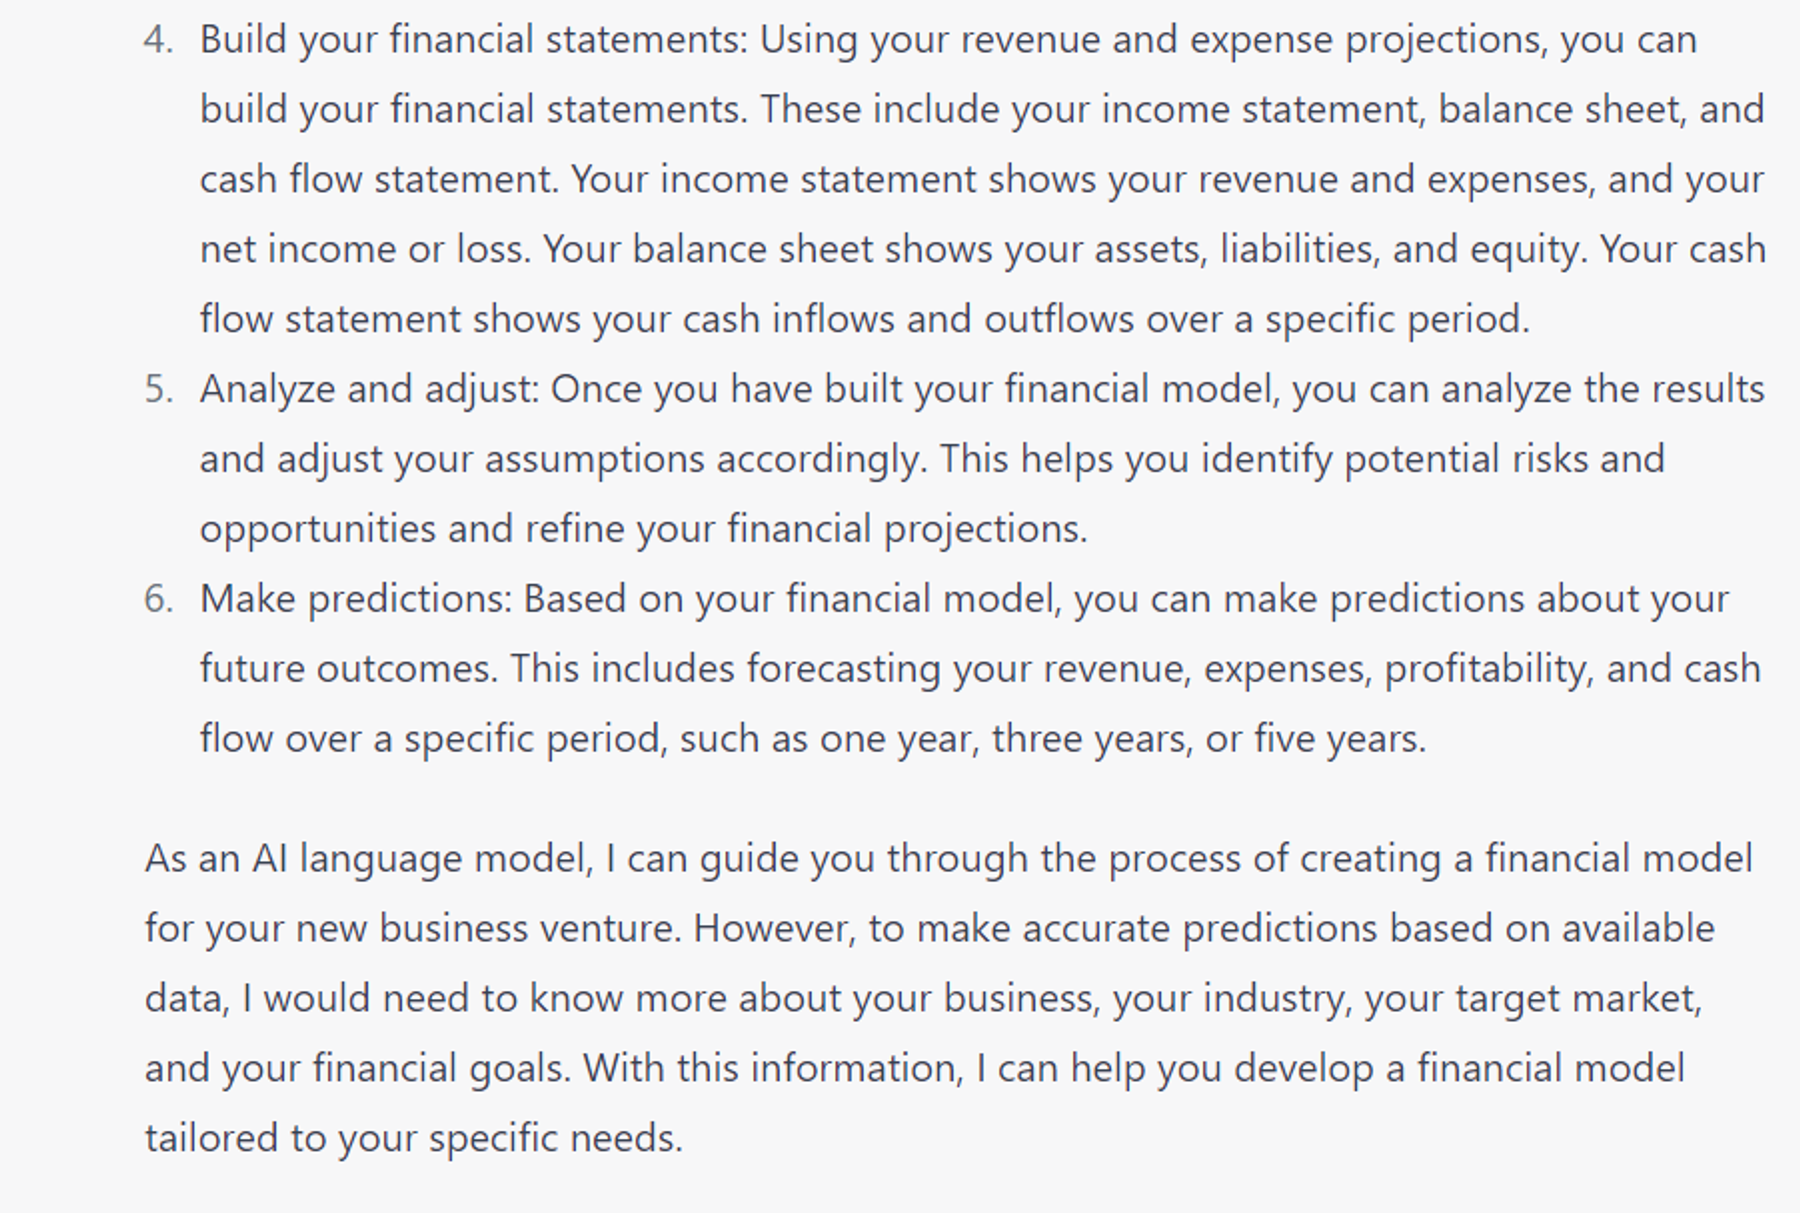  7 Proven ChatGPT Prompts: Analyze financial data